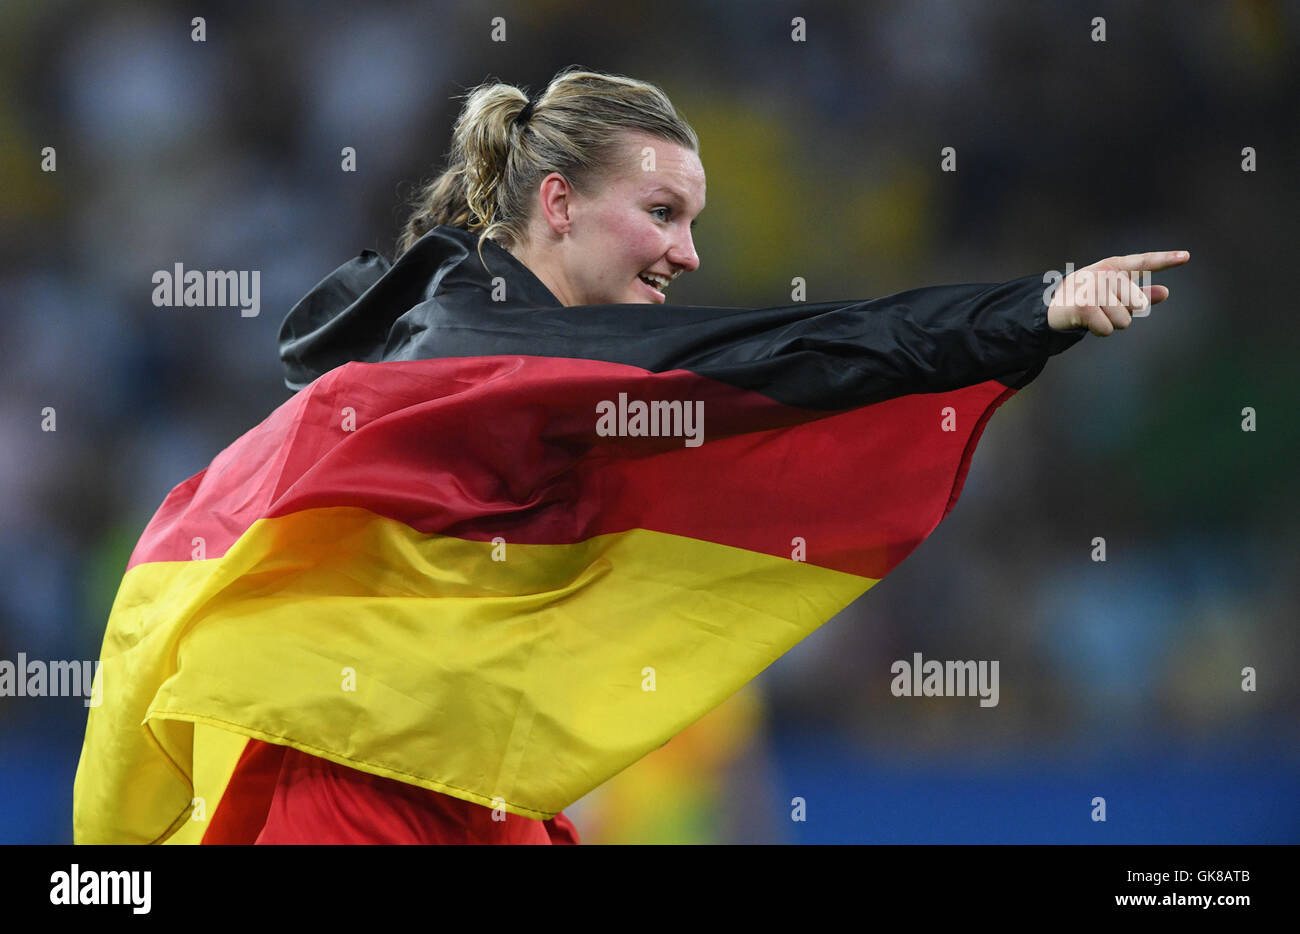 Rio de Janeiro, Brazil. 19th Aug, 2016. Alexandra Popp of Germany celebrate after winning the Women's soccer Gold Medal Match between Sweden and Germany during the Rio 2016 Olympic Games at the Maracana in Rio de Janeiro, Brazil, 19 August 2016. Photo: Soeren Stache/dpa/Alamy Live News Stock Photo